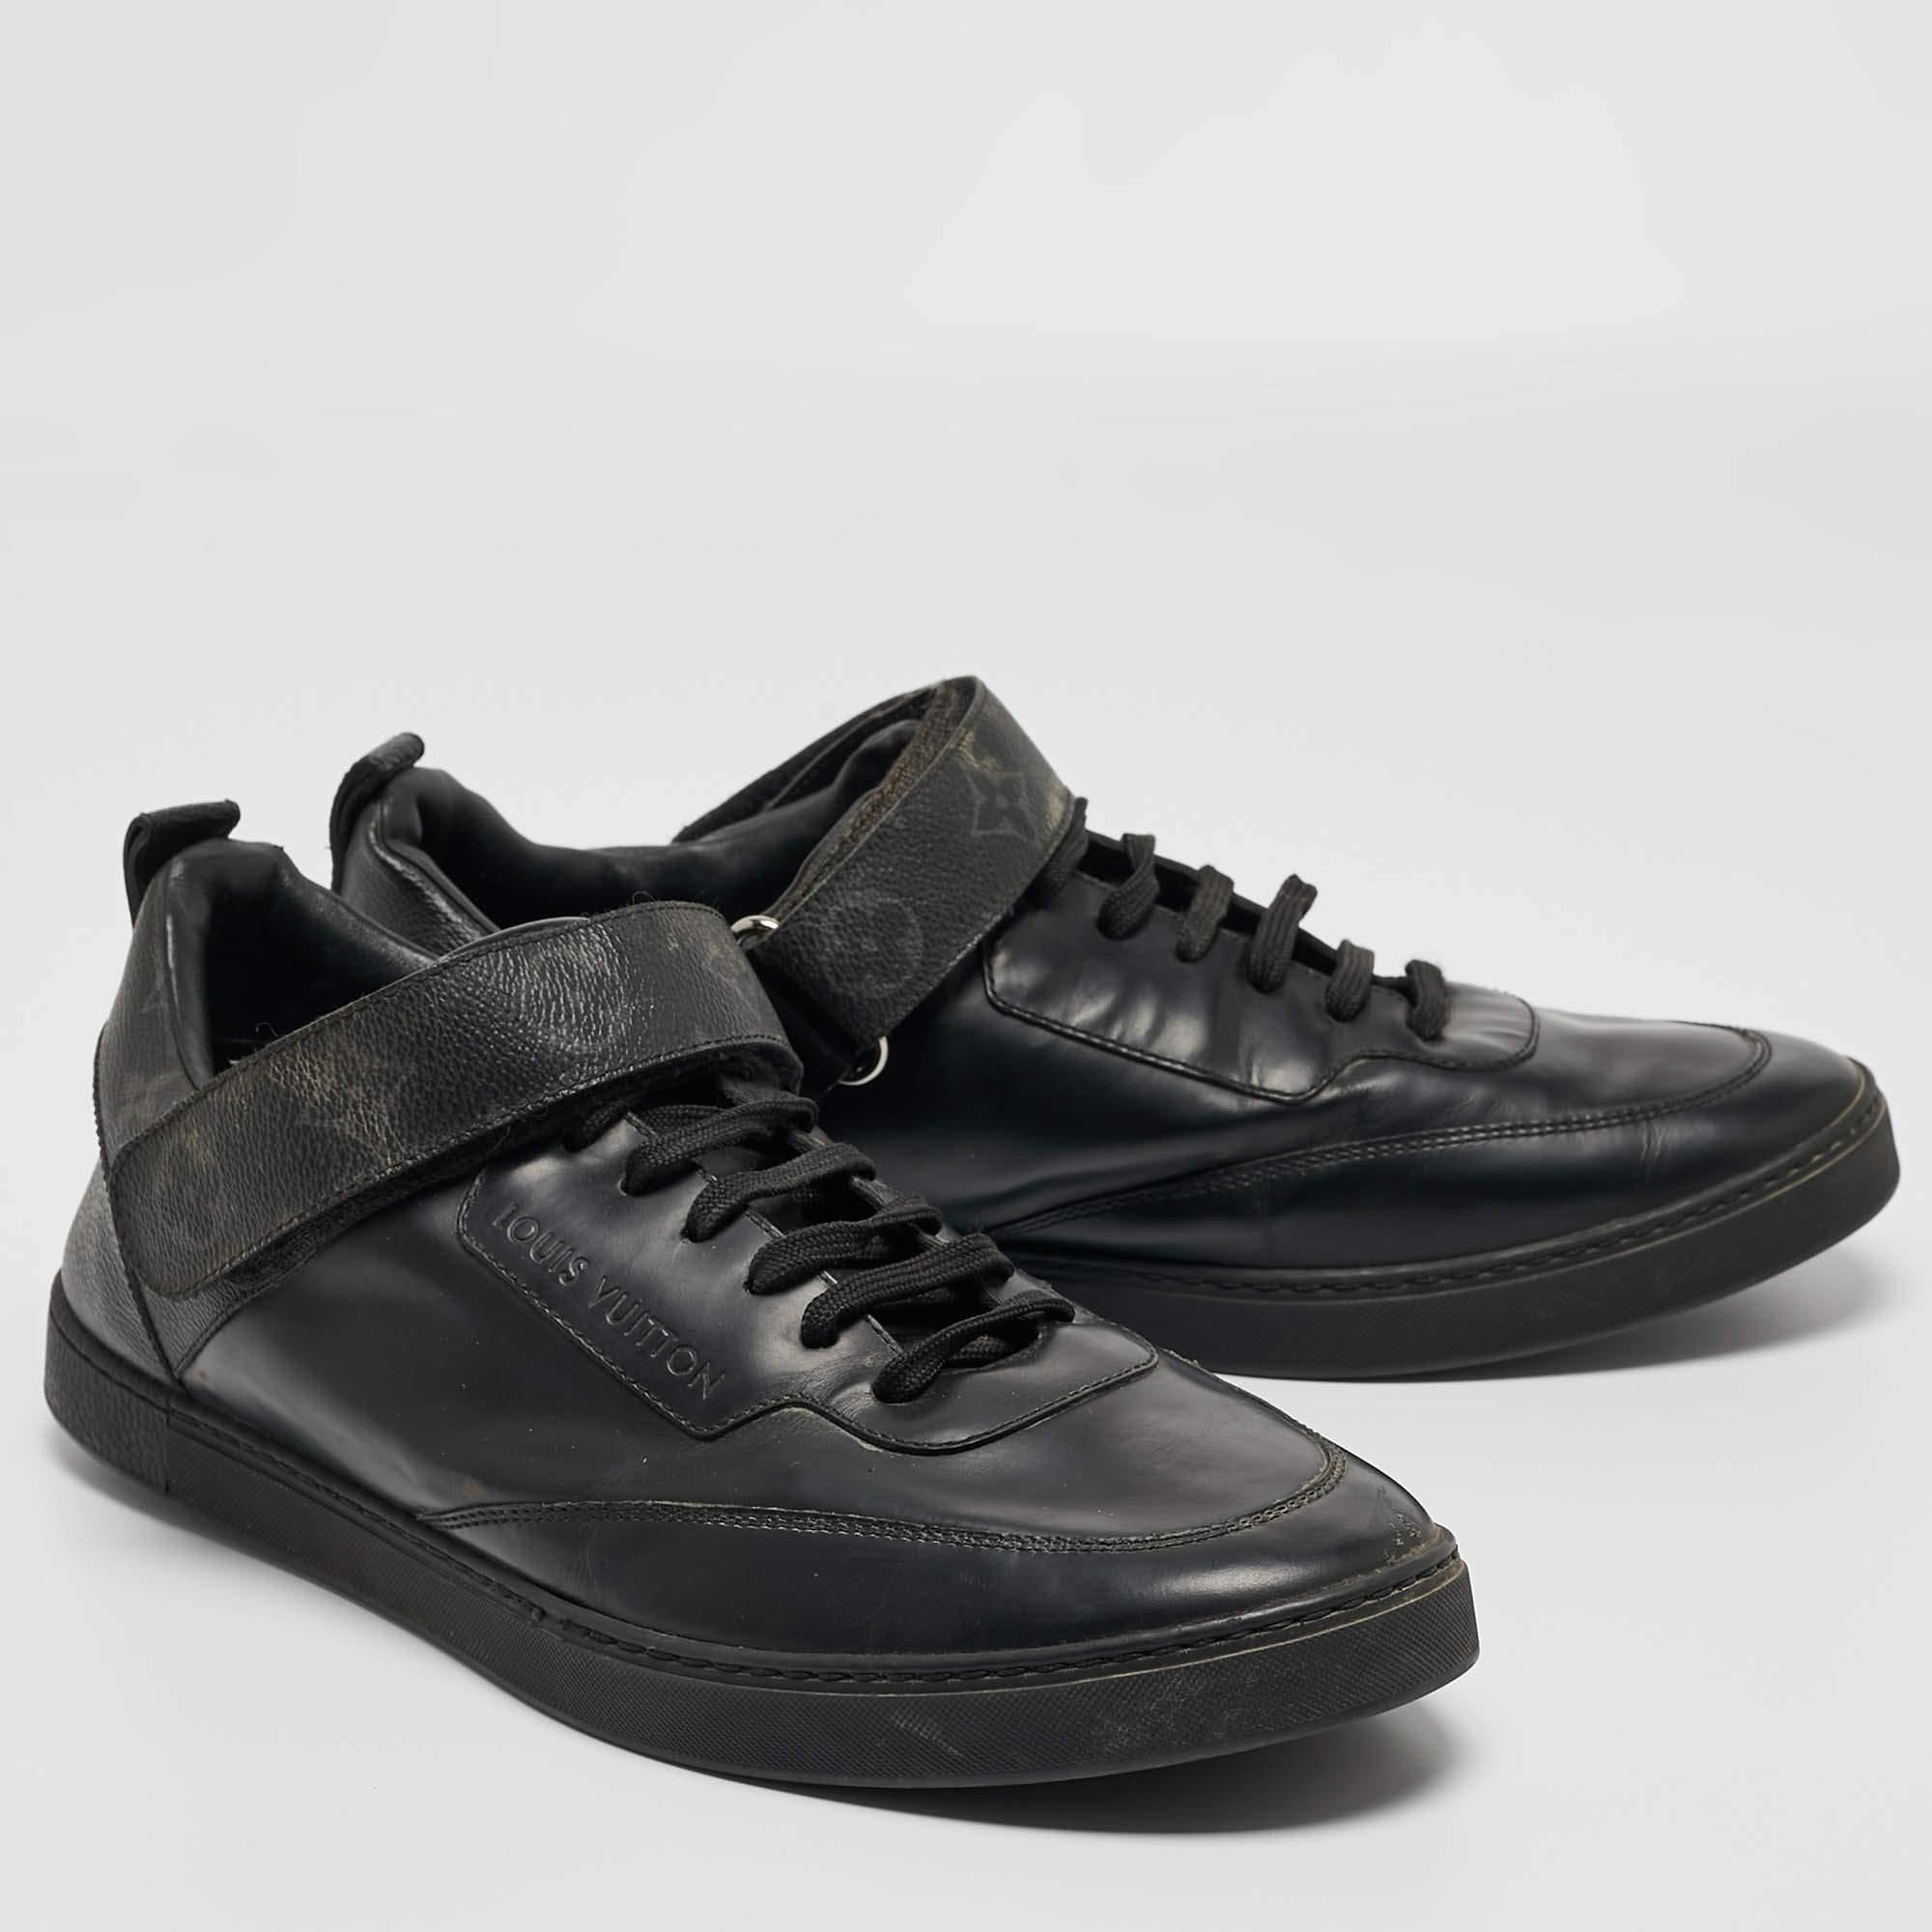 Louis Vuitton Black Leather and Monogram Canvas Passenger Sneakers Size 42.5 For Sale 1